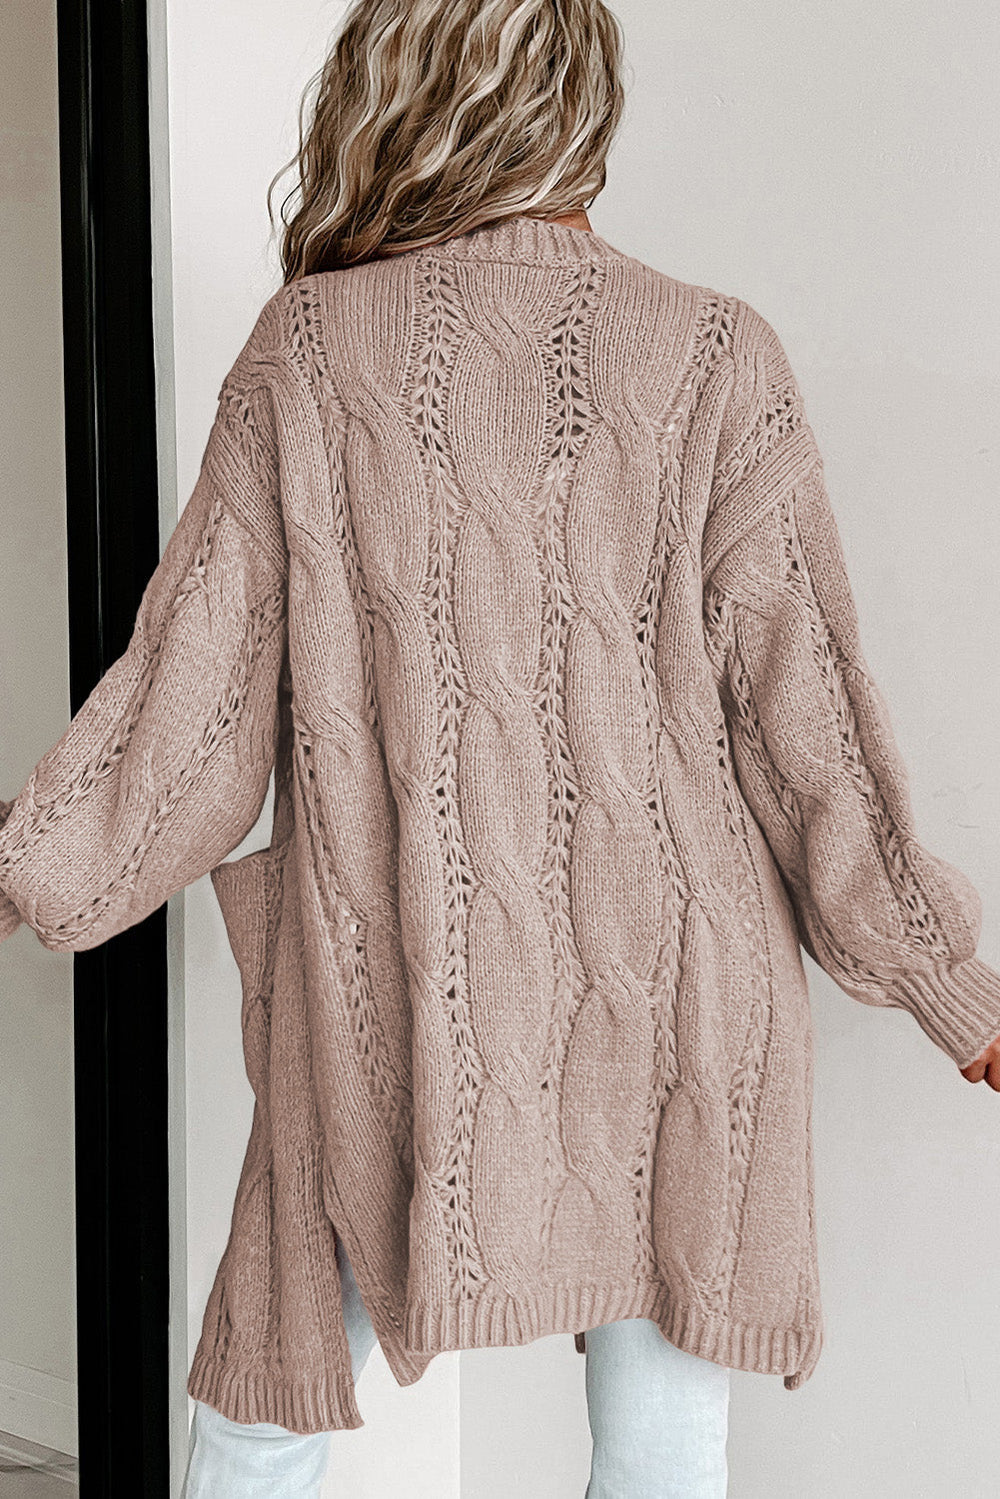 Apricot Ribbed Trim Hollow Knit Side Slits Cardigan